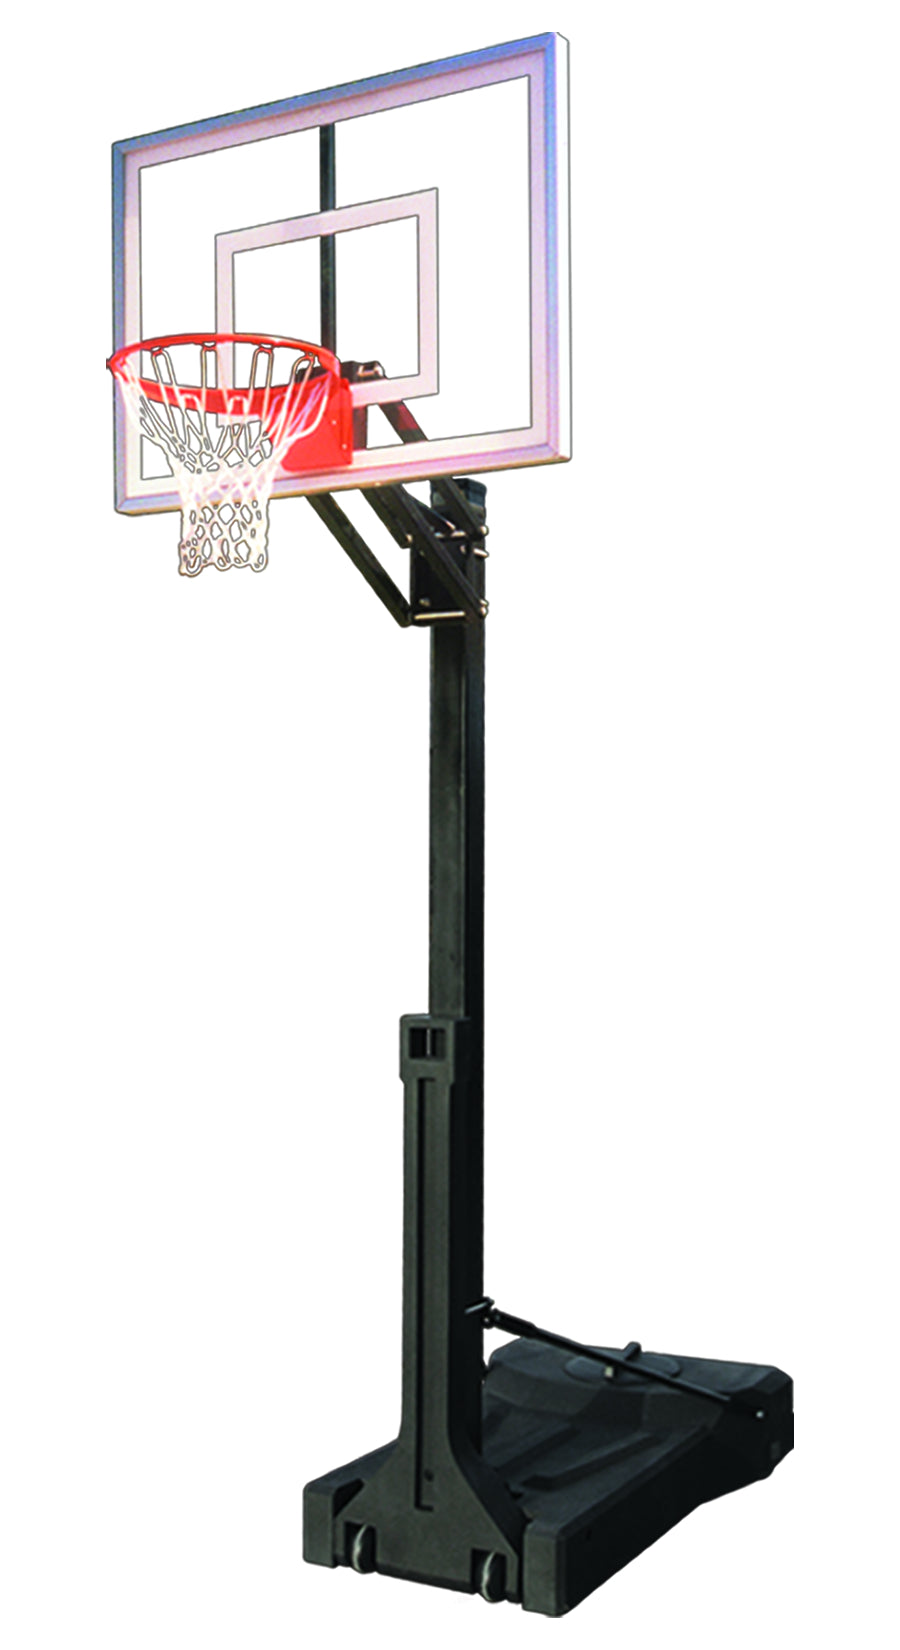 First Team OmniChamp Turbo Portable Basketball Goal - 36"x54" Tempered Glass